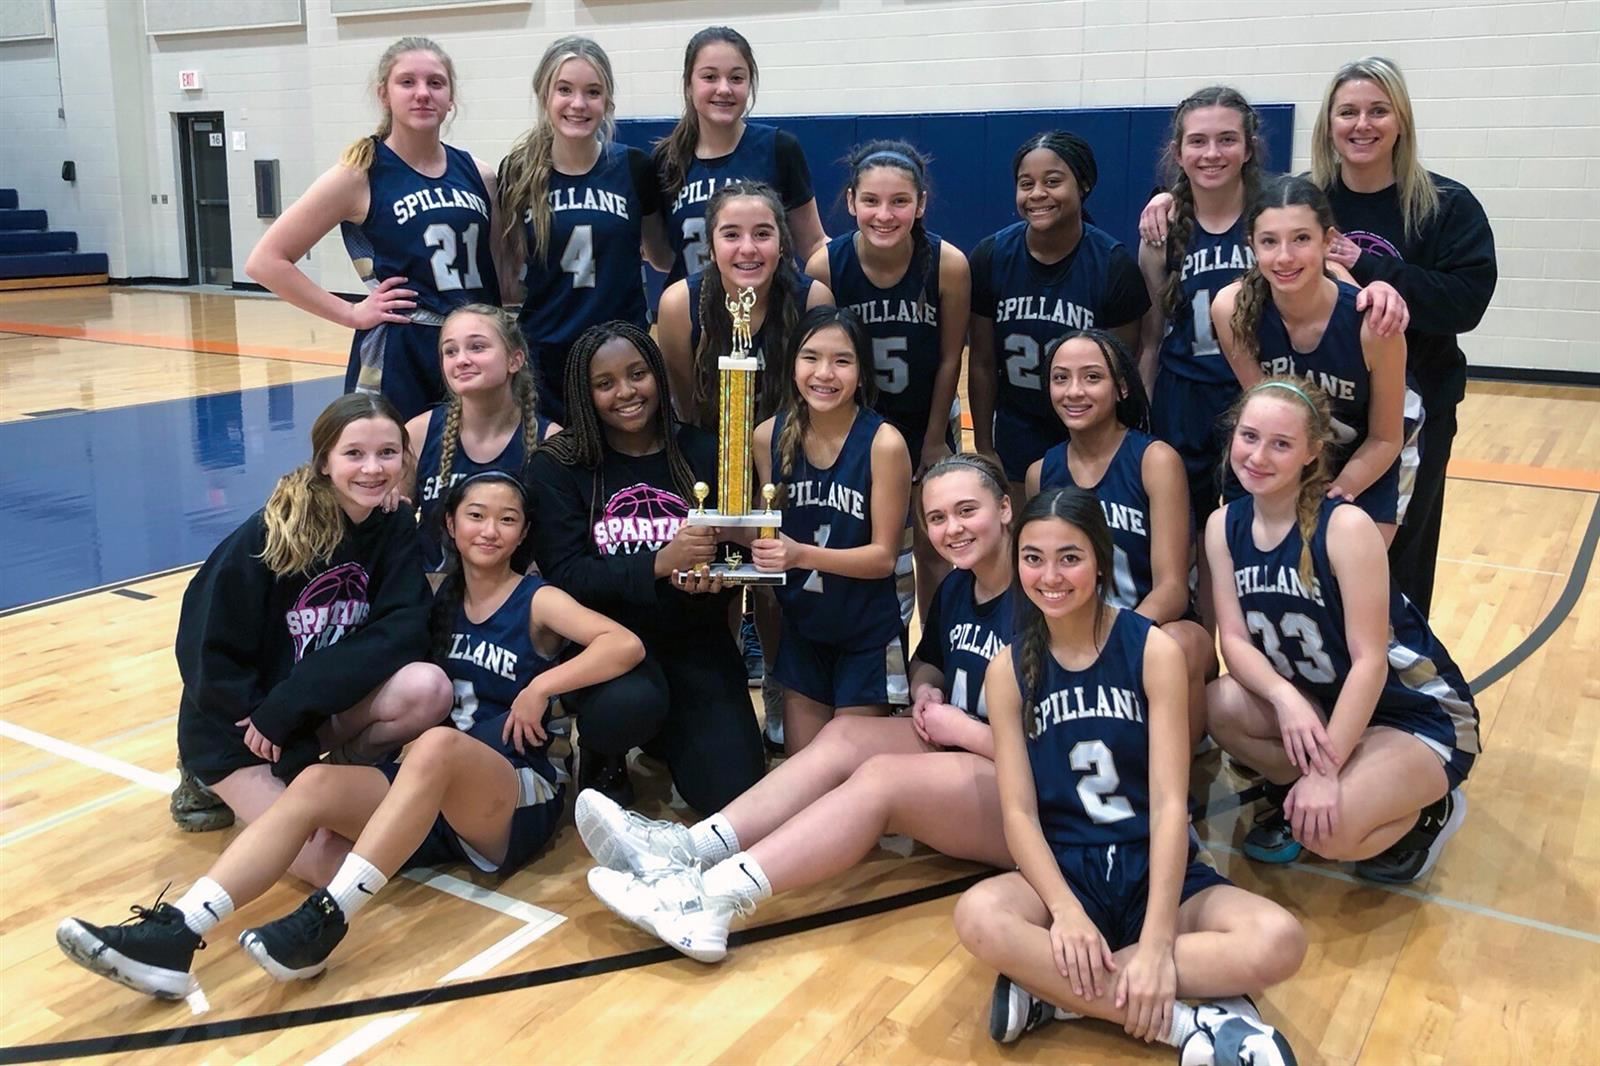 The Spillane Spartans’ eighth grade B team won the West Division girls’ basketball title with a 5-0 record.